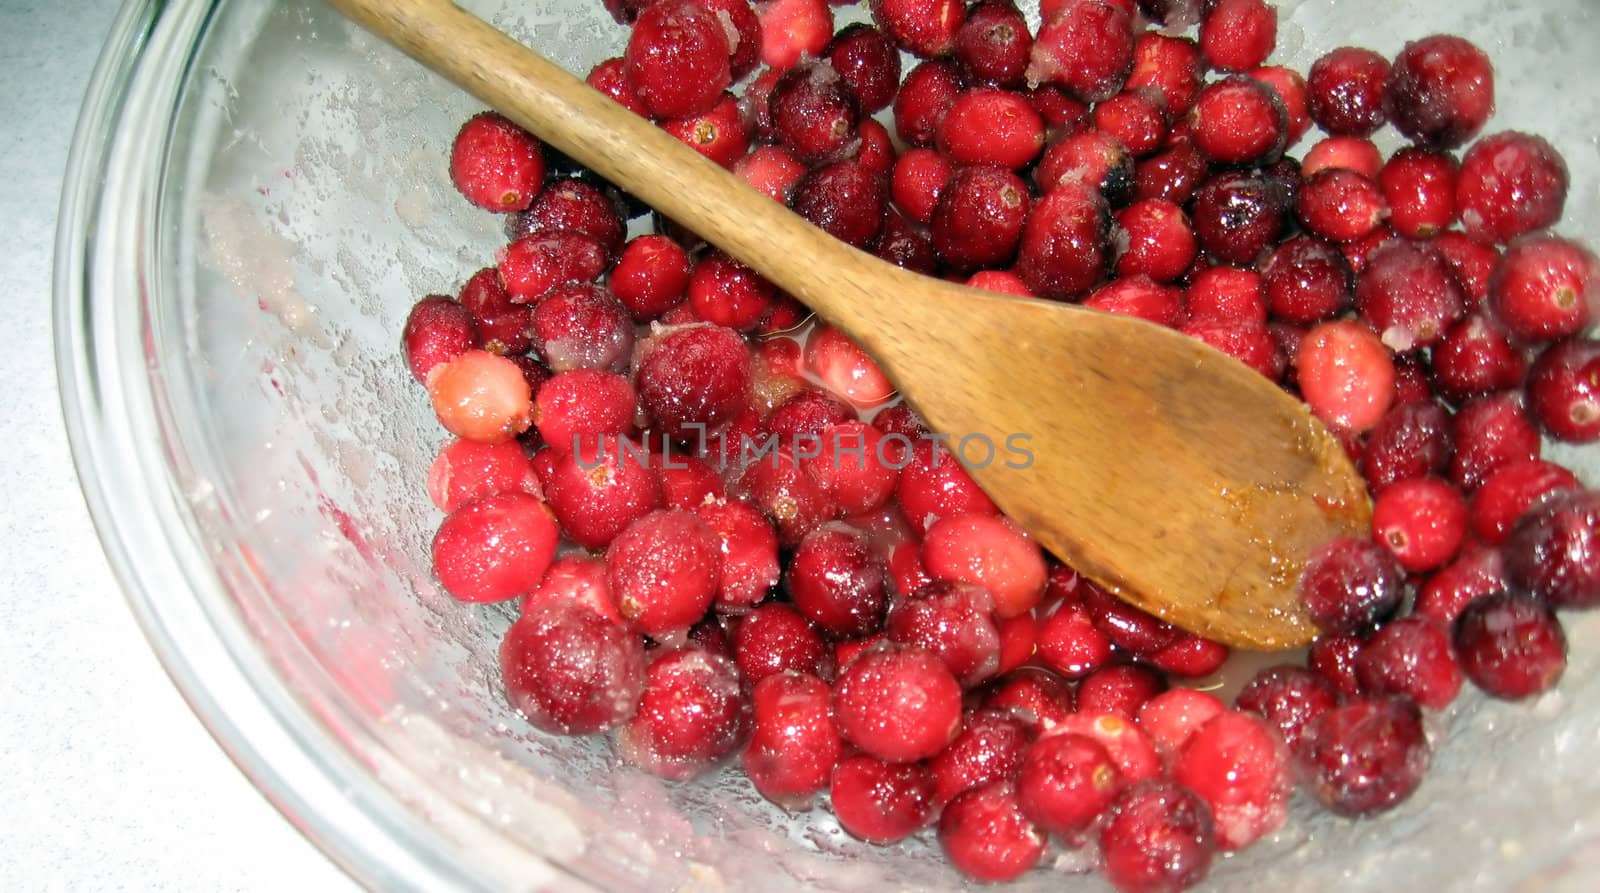 Cranberries with Sugar in Bowl, with Antique Wooden Spoon by loongirl